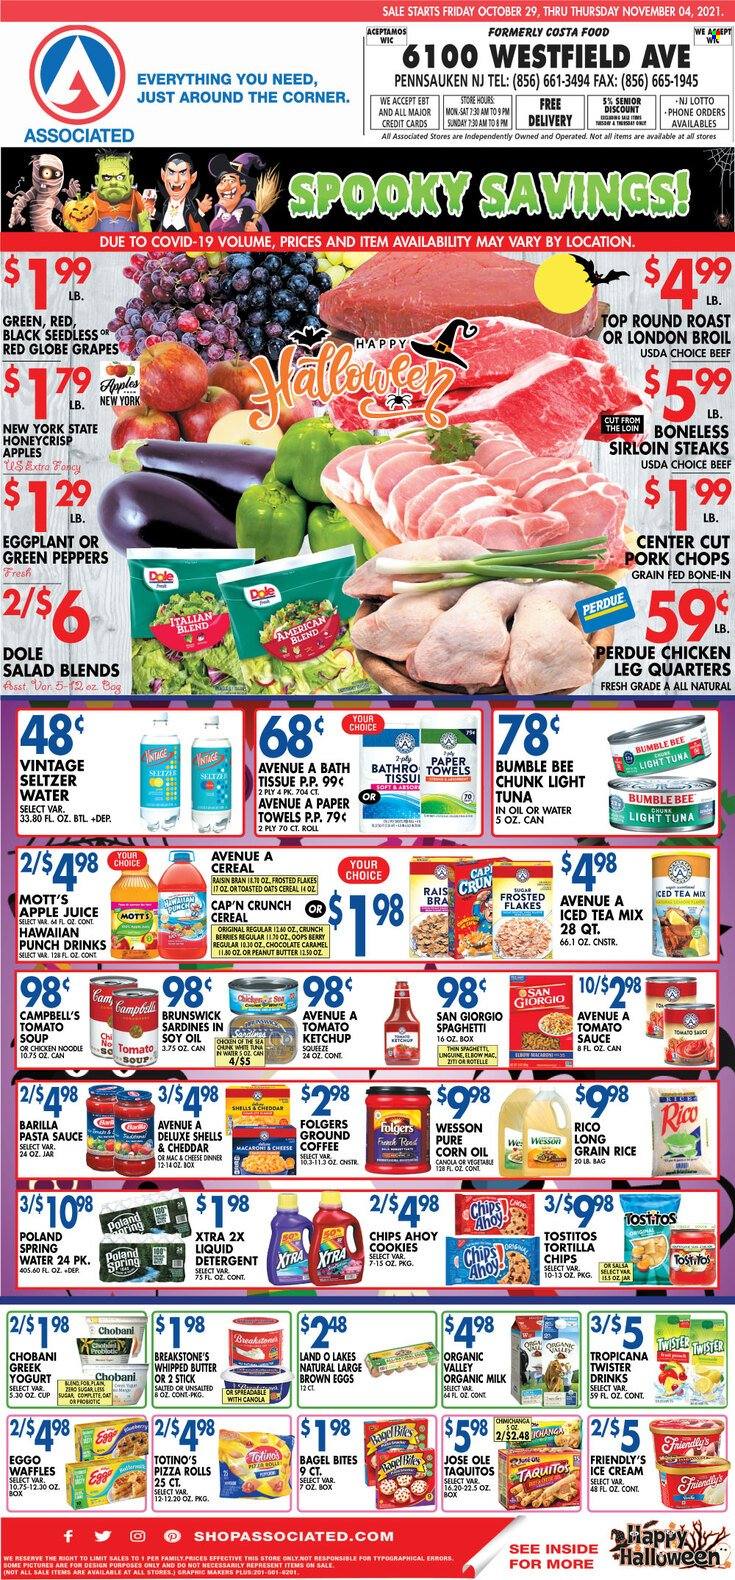 thumbnail - Associated Supermarkets Flyer - 10/29/2021 - 11/04/2021 - Sales products - bagels, pizza rolls, waffles, salad, Dole, peppers, eggplant, grapes, Red Globe, Mott's, sardines, tuna, Campbell's, spaghetti, tomato soup, pizza, pasta sauce, soup, Bumble Bee, sauce, Barilla, noodles, Perdue®, taquitos, greek yoghurt, yoghurt, Chobani, organic milk, eggs, whipped butter, ice cream, Friendly's Ice Cream, cookies, tortilla chips, chips, Tostitos, tomato sauce, light tuna, cereals, Cap'n Crunch, Frosted Flakes, Raisin Bran, toasted oats, rice, long grain rice, ketchup, corn oil, peanut butter, apple juice, juice, ice tea, Tropicana Twister, seltzer water, spring water, coffee, Folgers, chicken legs, beef meat, steak, round roast, sirloin steak, pork chops, pork meat, bath tissue, kitchen towels, paper towels, detergent, liquid detergent, XTRA. Page 1.